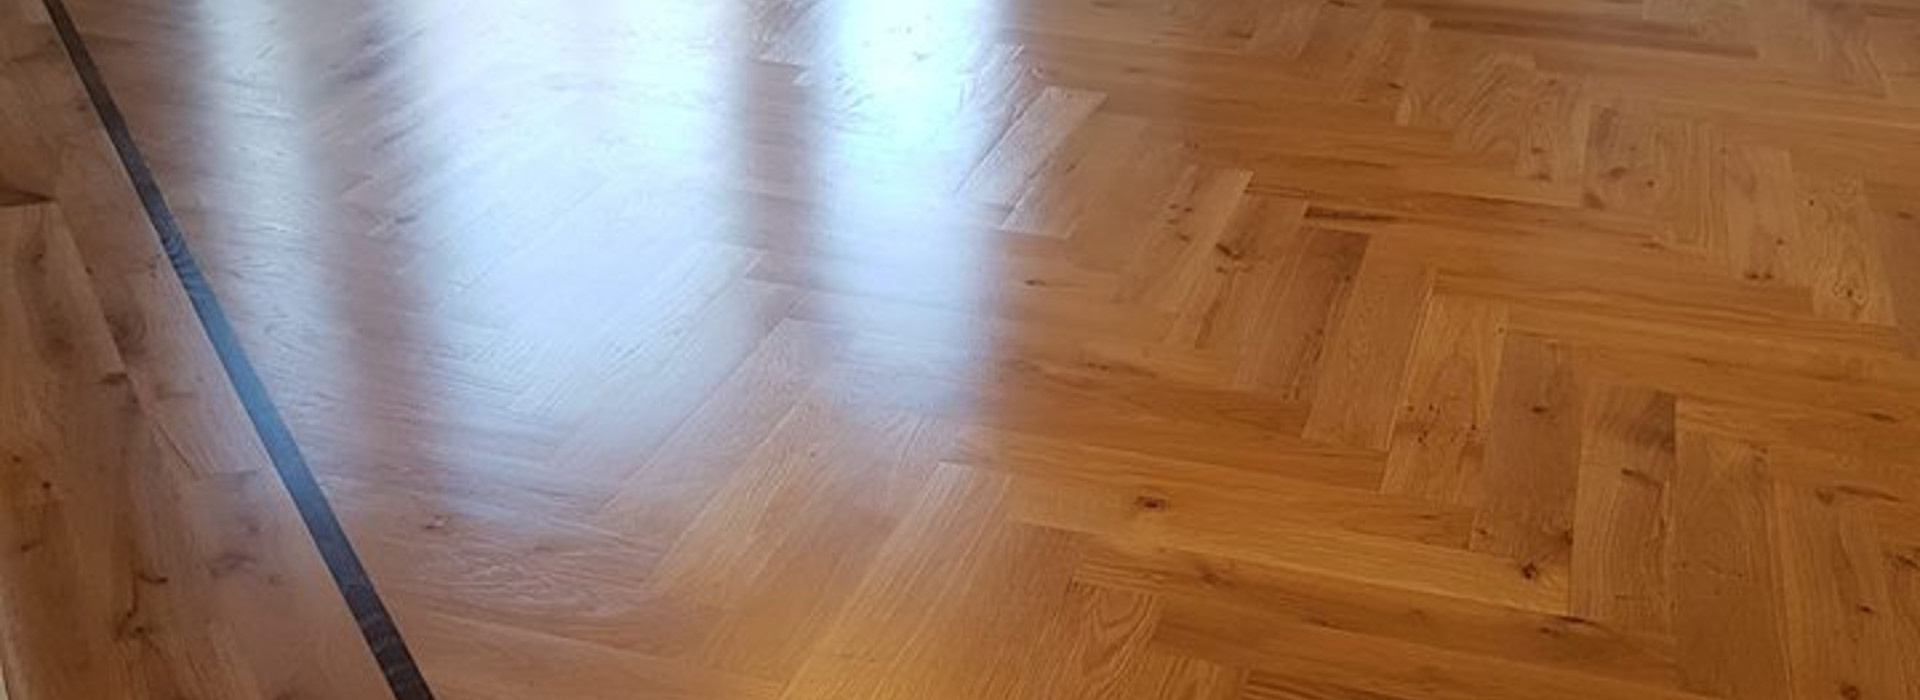 Add luxury and prestige to your home by Parquet flooring